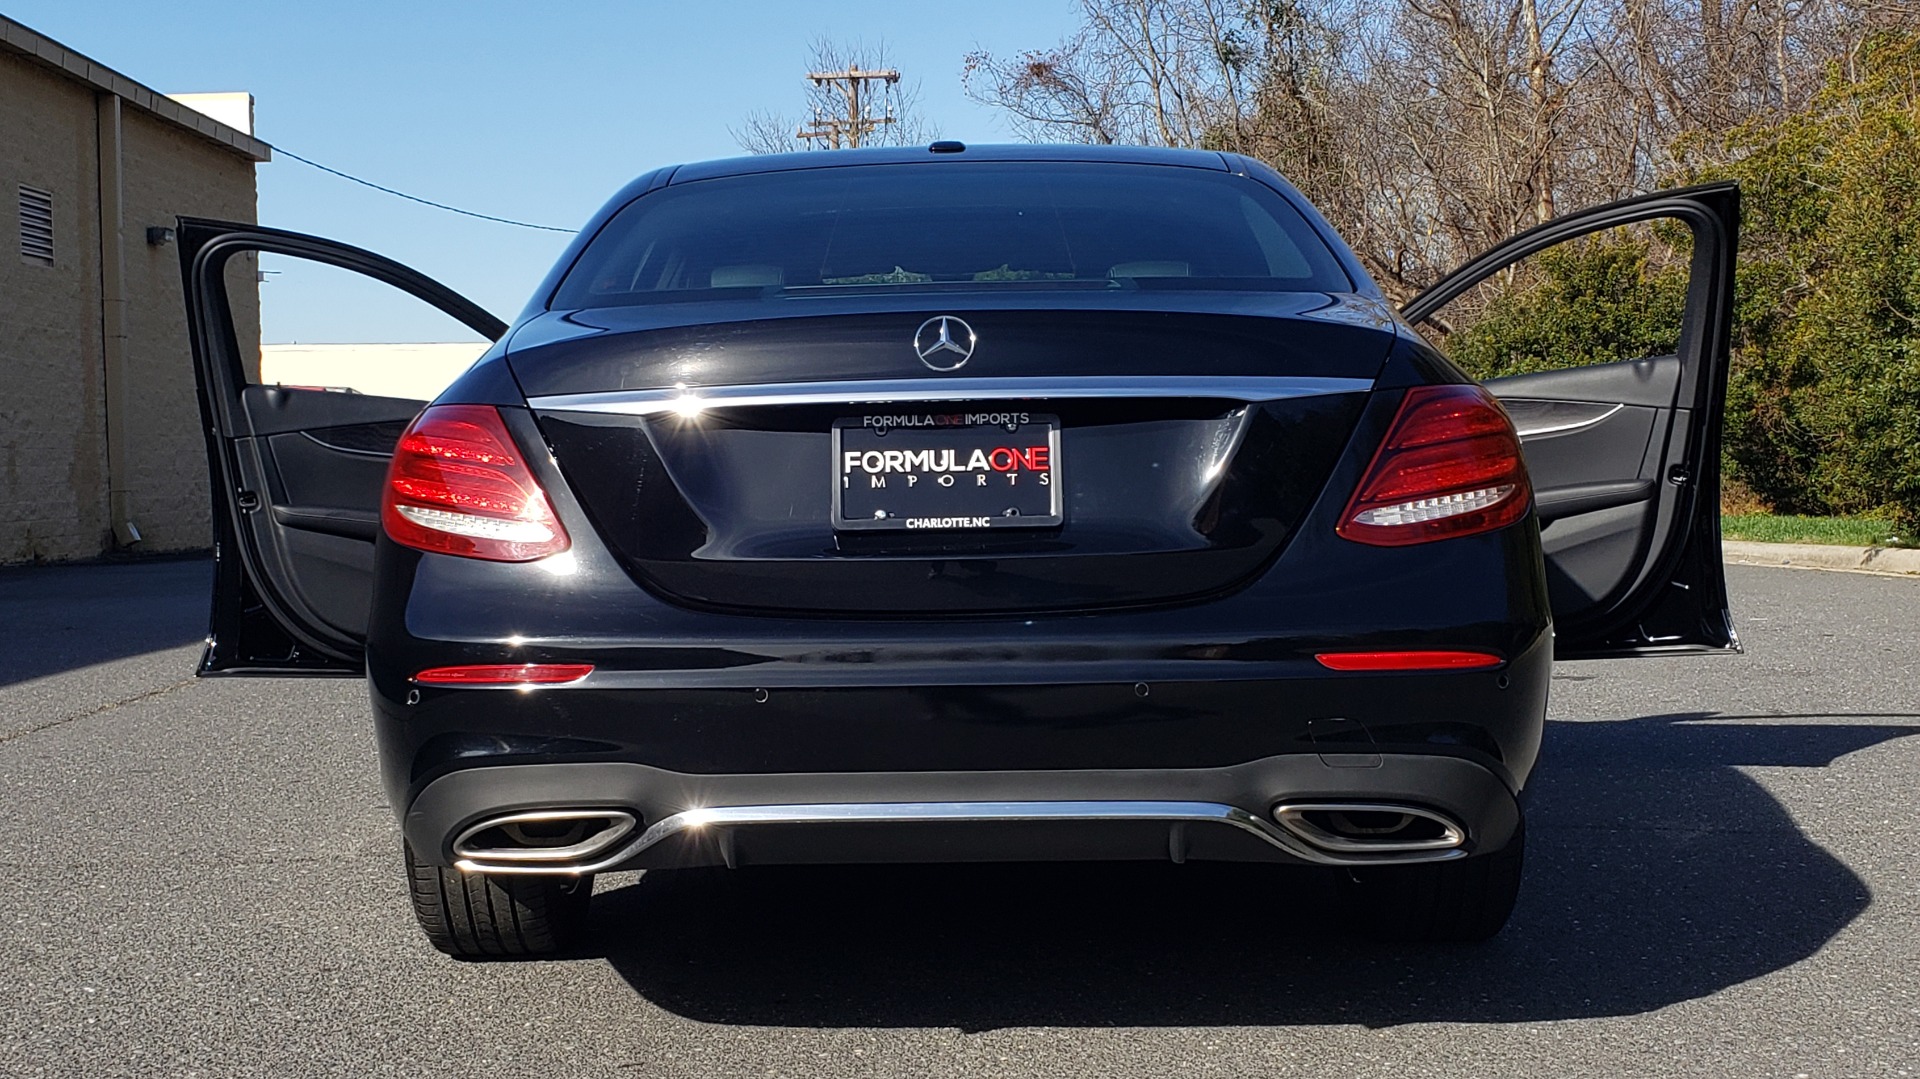 Used 2017 Mercedes-Benz E-CLASS E 300 PREMIUM / NAV / SUNROOF / BURMESTER / HTD STS / REARVIEW for sale Sold at Formula Imports in Charlotte NC 28227 29